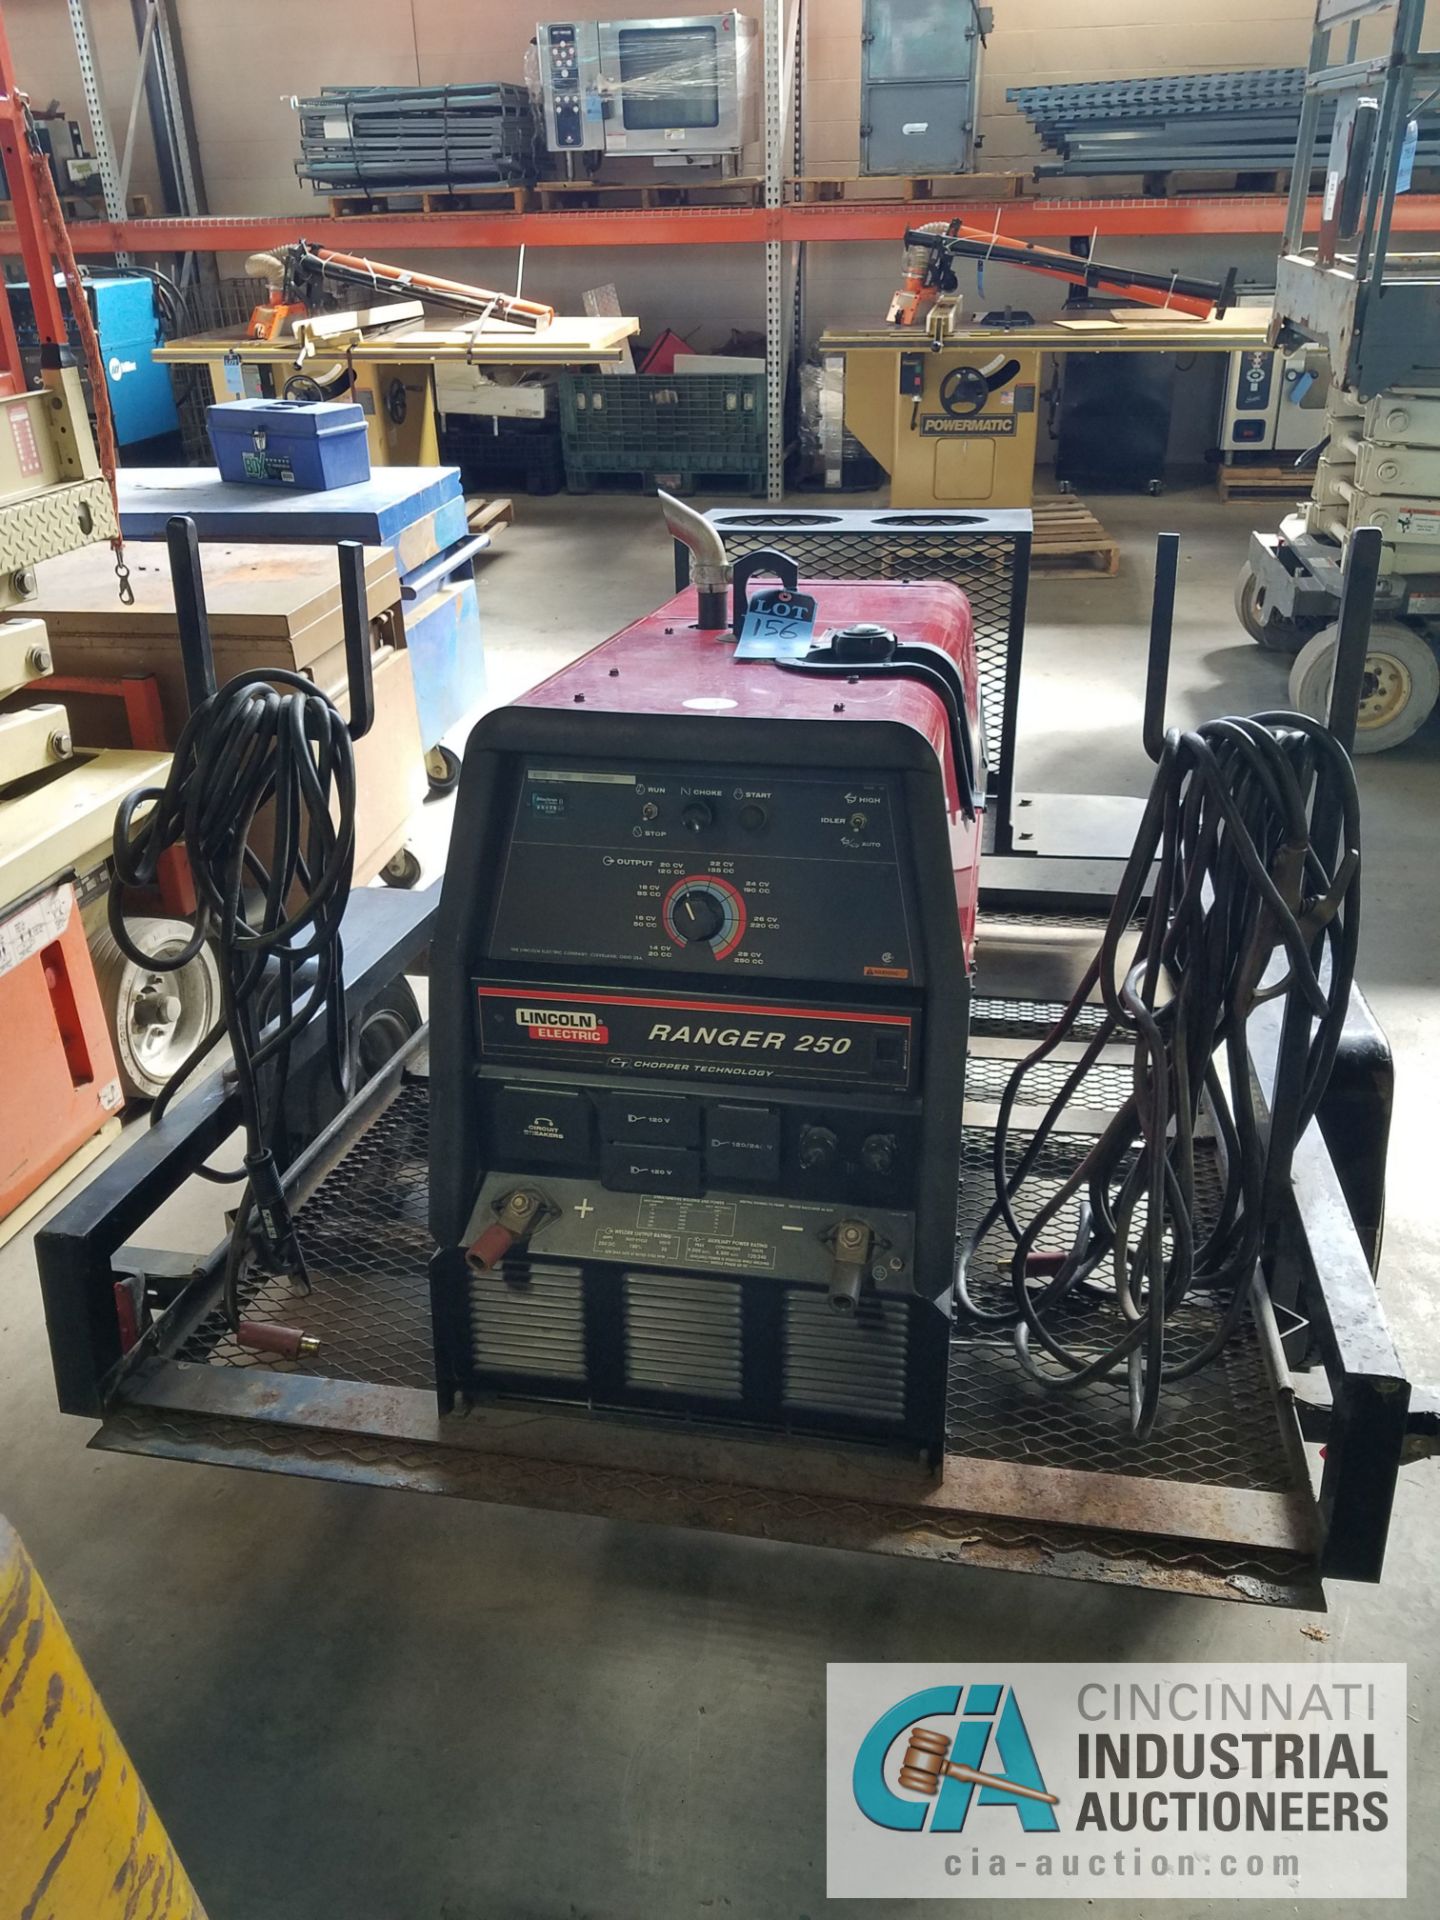 LINCOLN RANGER 250 GENSET WELDER WITH 6' SINGLE AXLE TRAILER; S/N U1020619592, ONLY 72 HOURS - Image 9 of 14